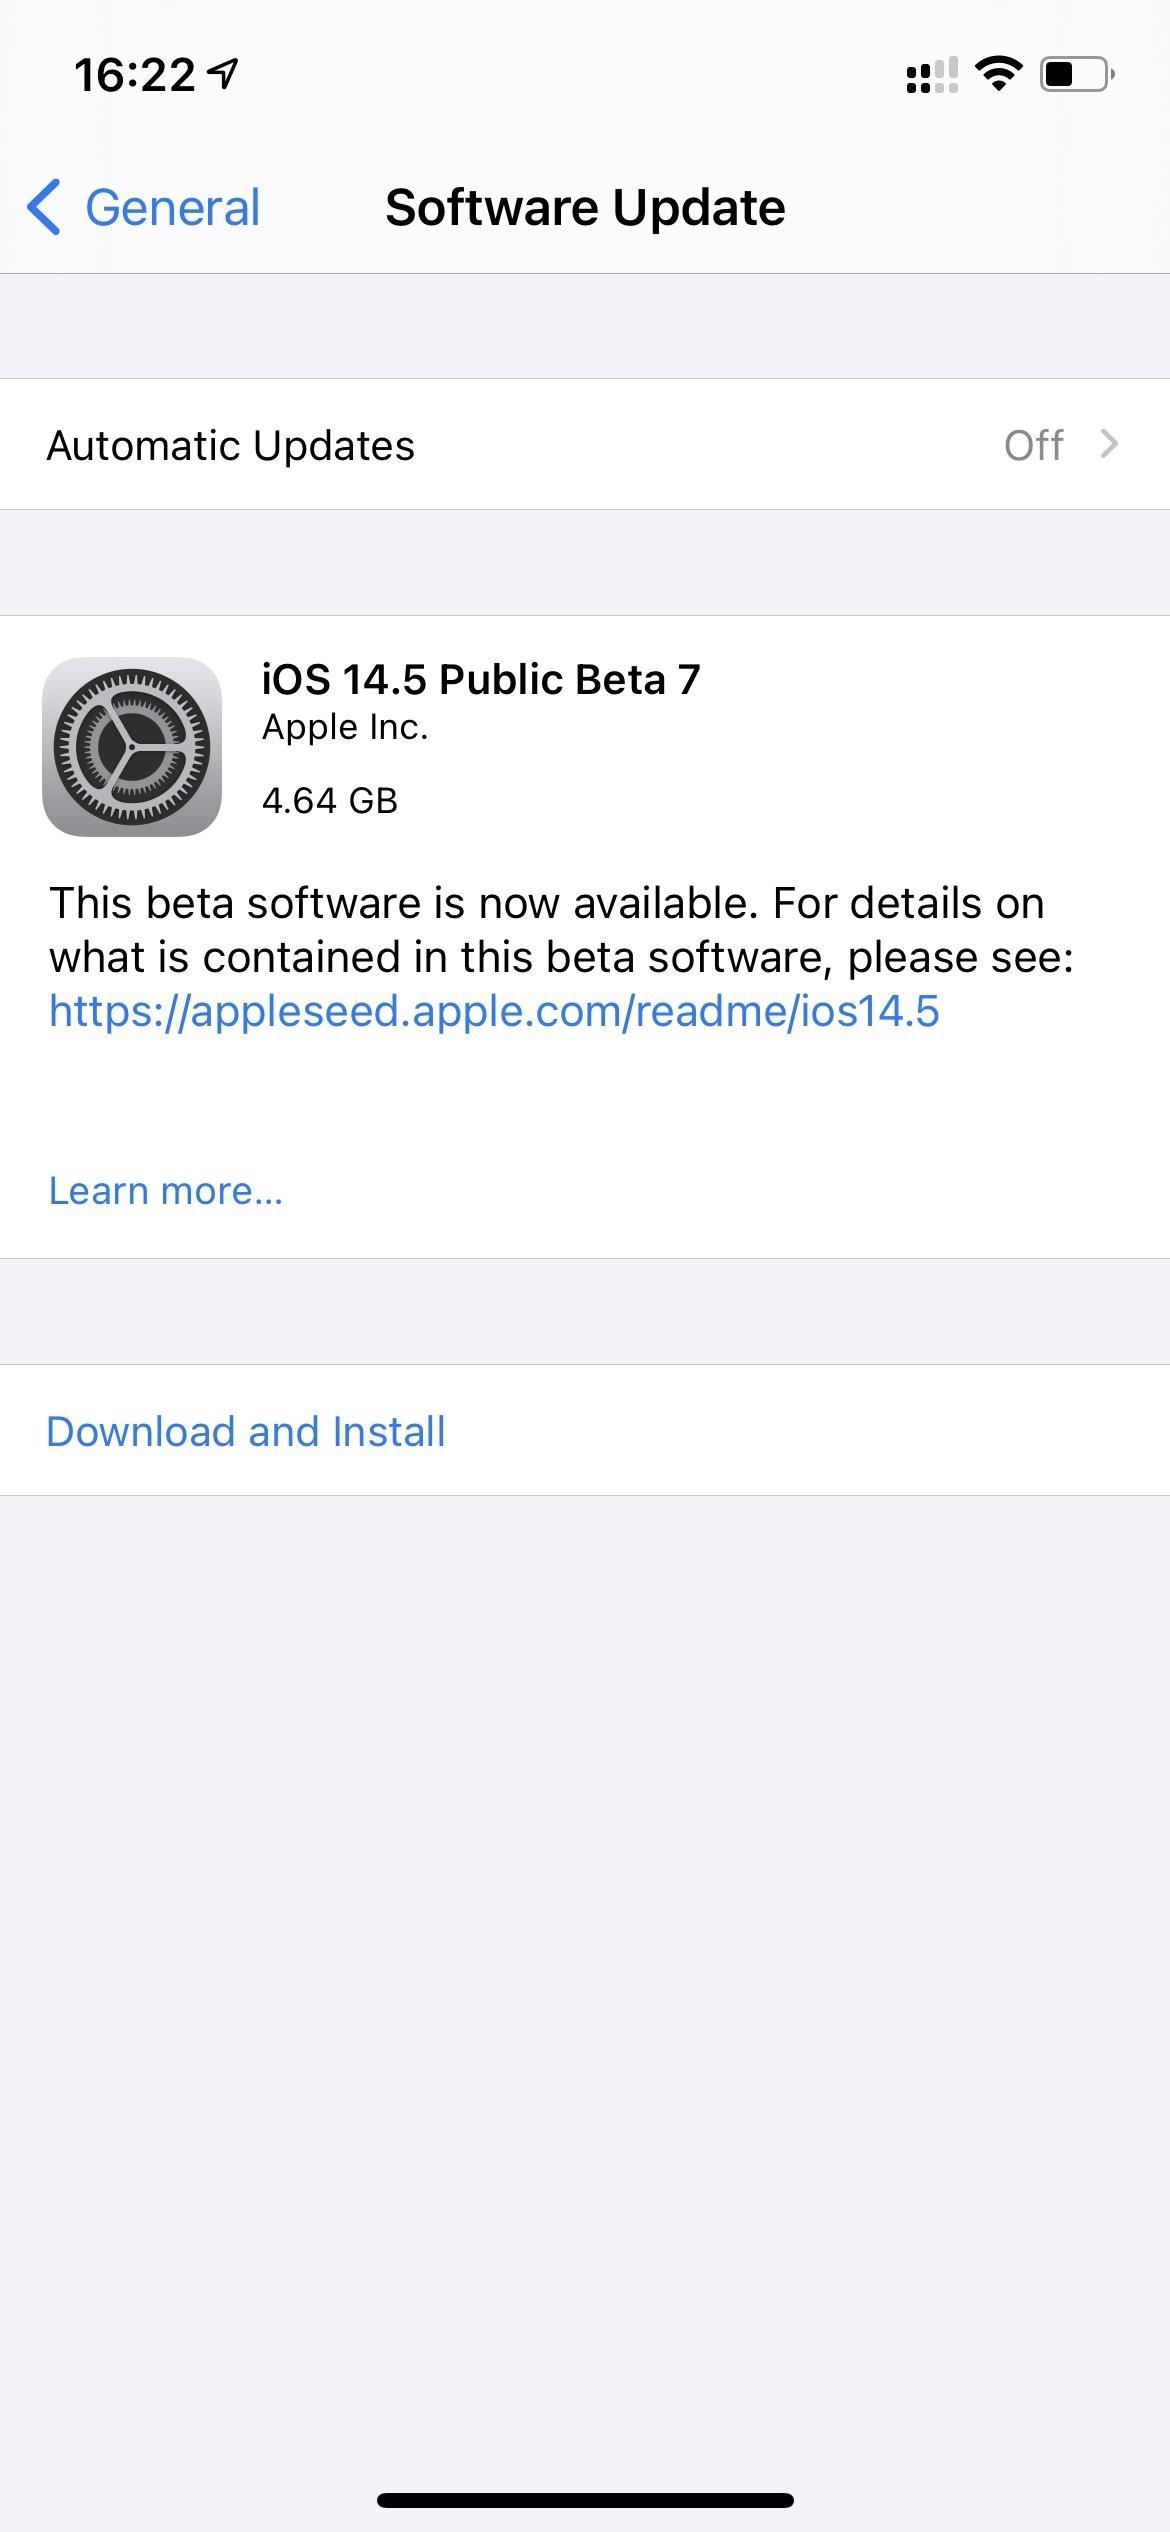 Apple Releases iOS 14.5 Public Beta 7 for iPhone, Introduces Under-the-Hood Updates